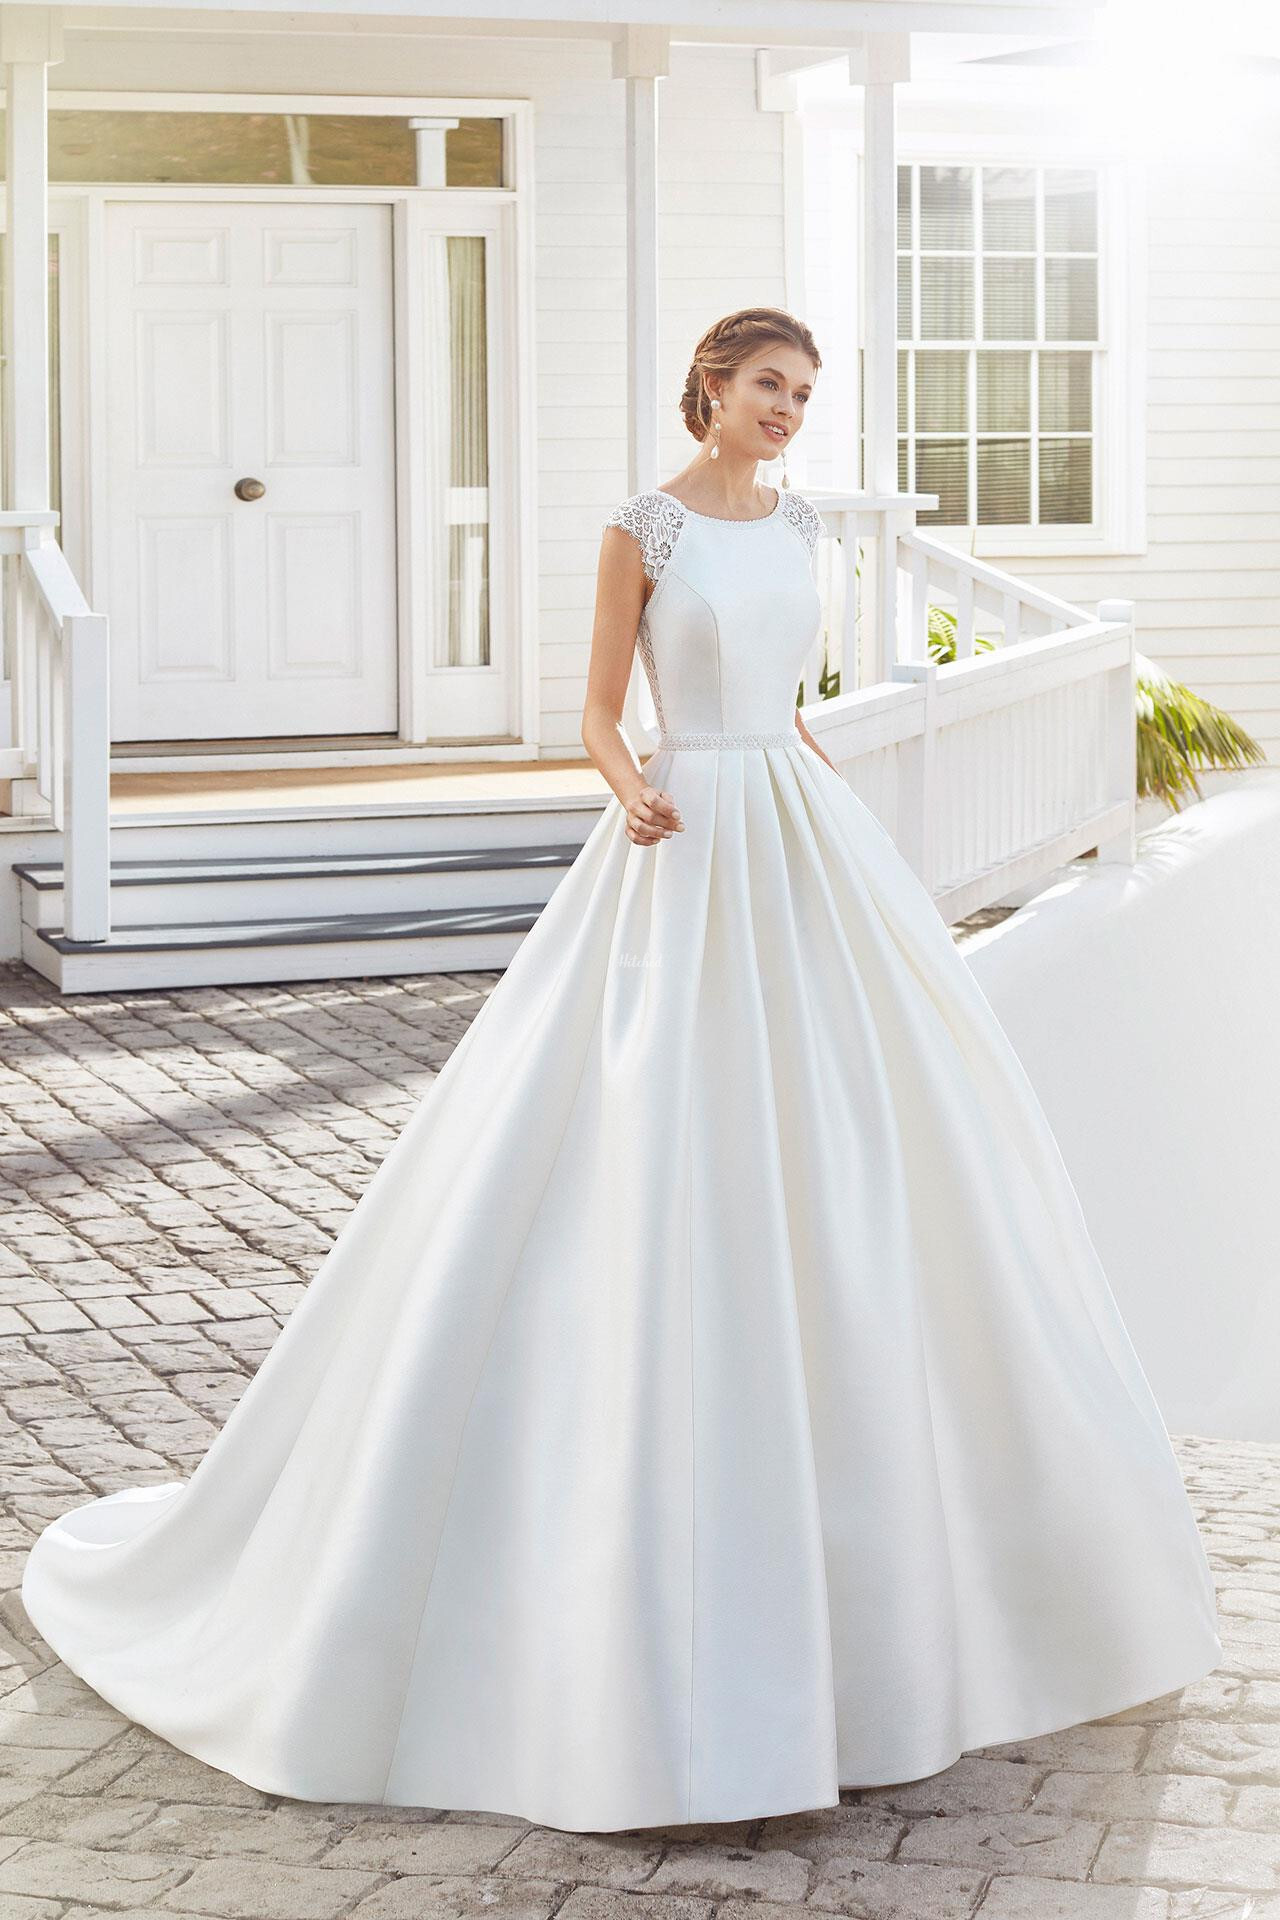 Cyan Wedding Dress from Rosa Clará - hitched.co.uk